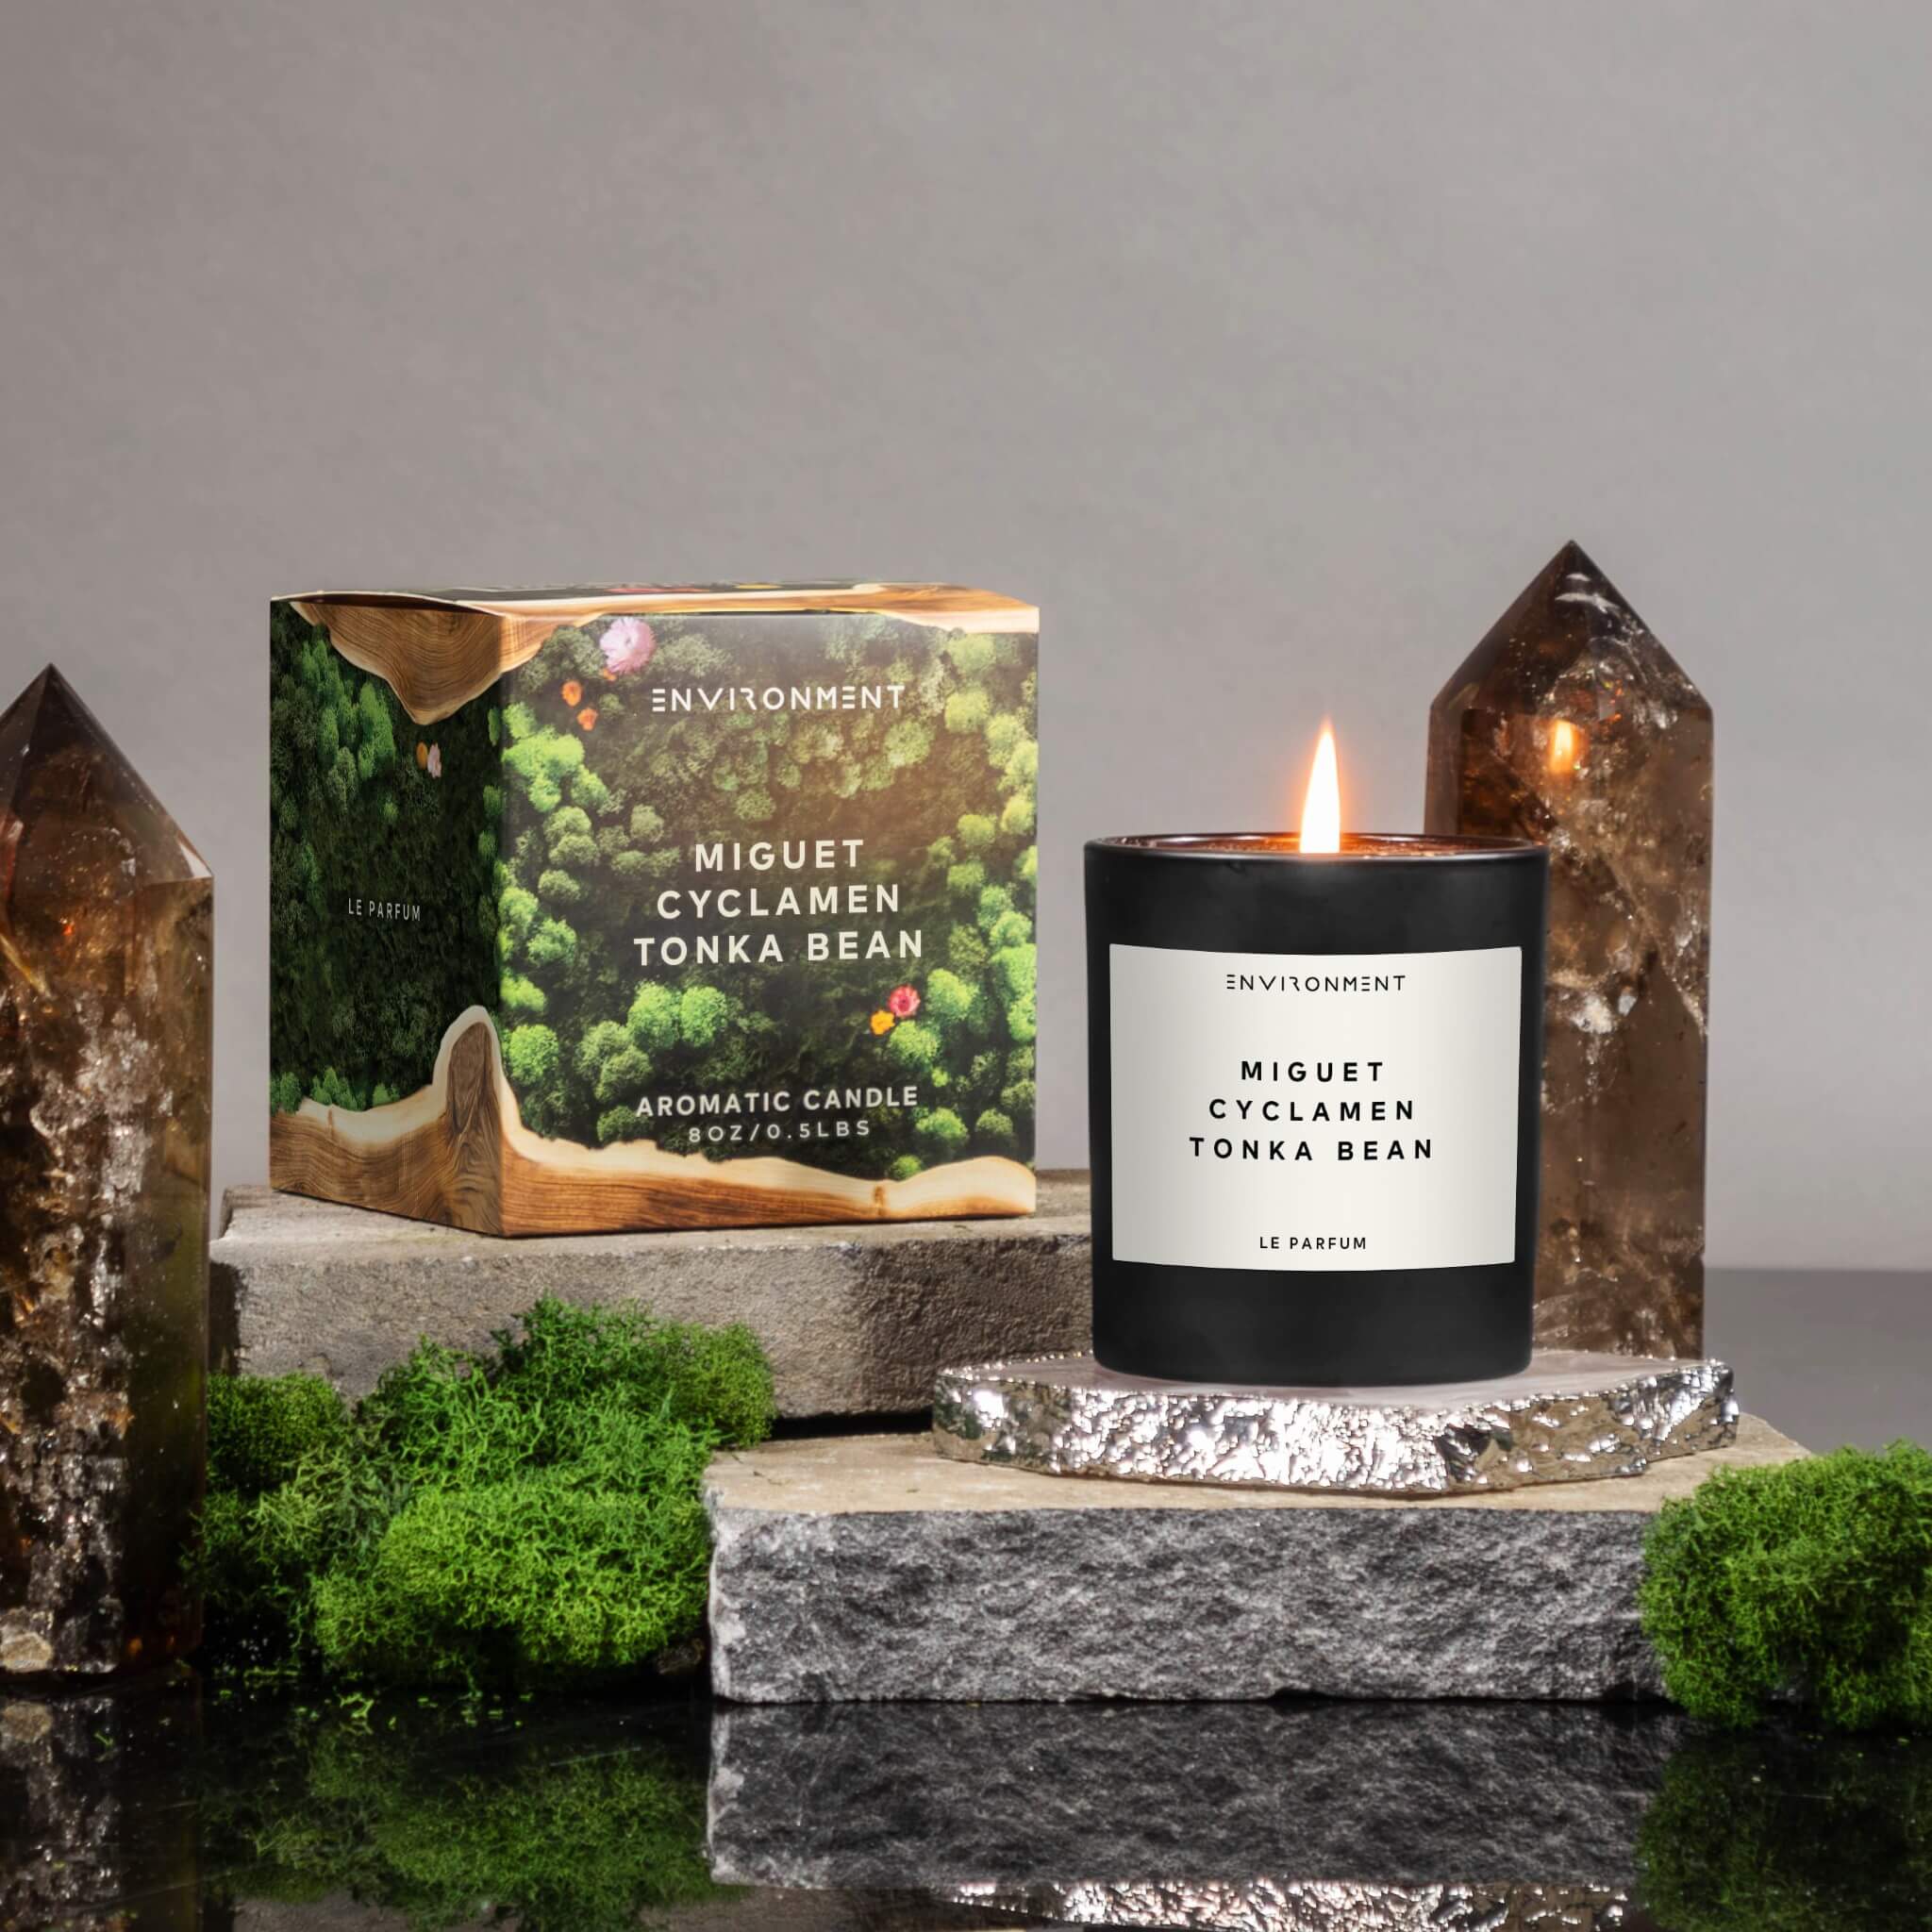 8oz Muguet | Cyclamen | Tonka Bean Candle with Lid and Box (Inspired by YSL Libre®)